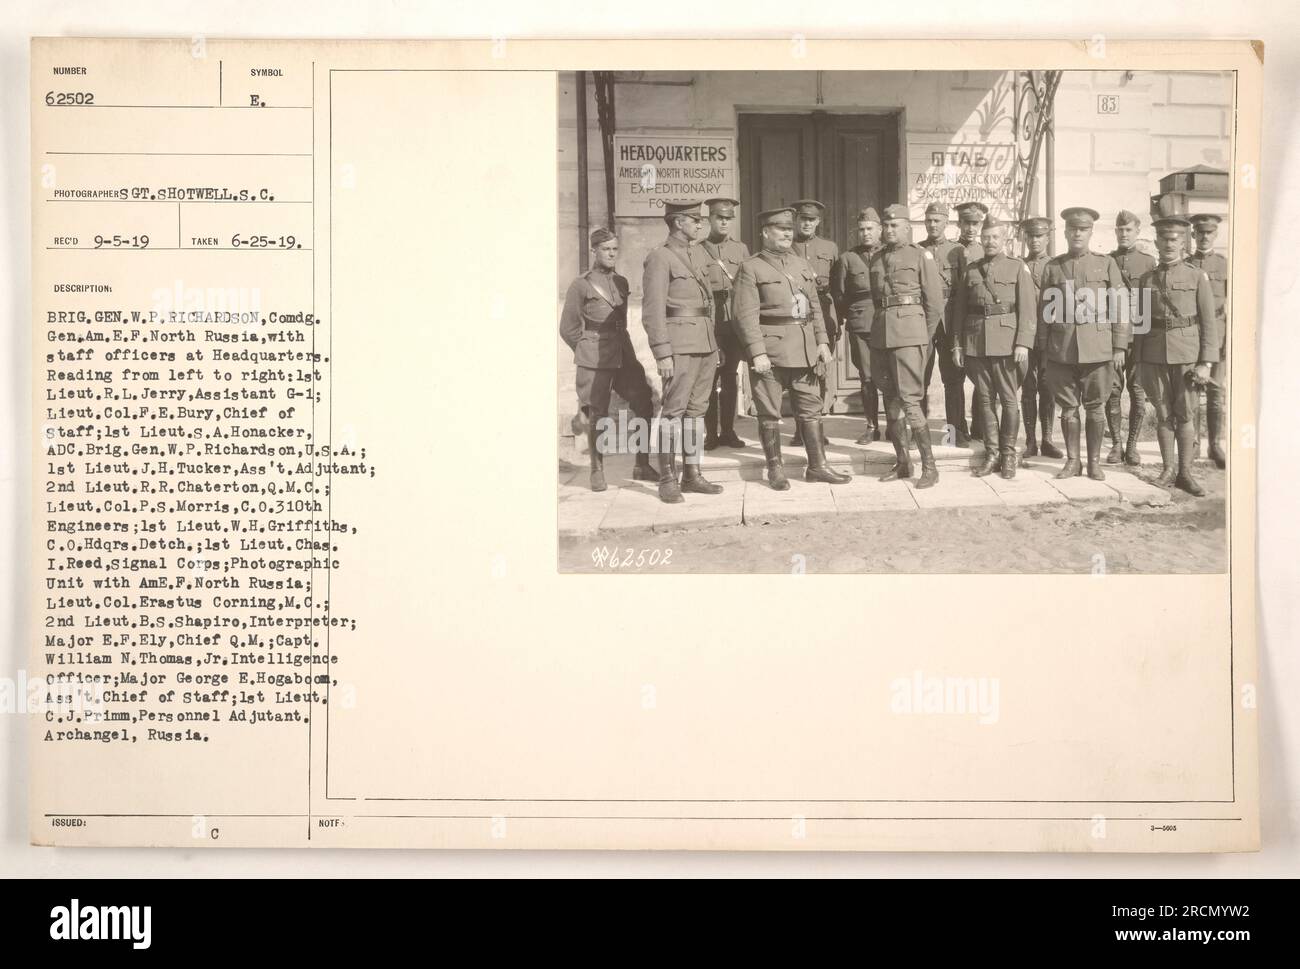 Brig. Gen. W.P. Richardson, Comdg. Gen. A.E.F. North Russia, and his staff officers at Headquarters. Personnel from left to right: 1st Lieut.R.L. Jerry, Assistant G-1; Lieut. Col.F.E. Bury, Chief of Staff; lst Lieut.S.A.Honacker, ADC to Brig. Gen. Richardson; 1st Lieut. J.H. Tucker, Ass't. Adjutant; 2nd Lieut. R. R. Chaterton, Q.M.C. Lieut. Col.P.S.Morris, C.O. 310th Engineers; 1st Lieut.W.H. Griffiths, C.O.Hdqrs.Detch.; lst Lieut. Chas. I. Reed, Signal Corps; Photographic Unit with AmE.F.North Russia; Lieut. Col. Erastus Corning, M.C.; 2nd Lieut.B.S.Shapiro, Interpreter; Major E.F.Ely, Chief Stock Photo